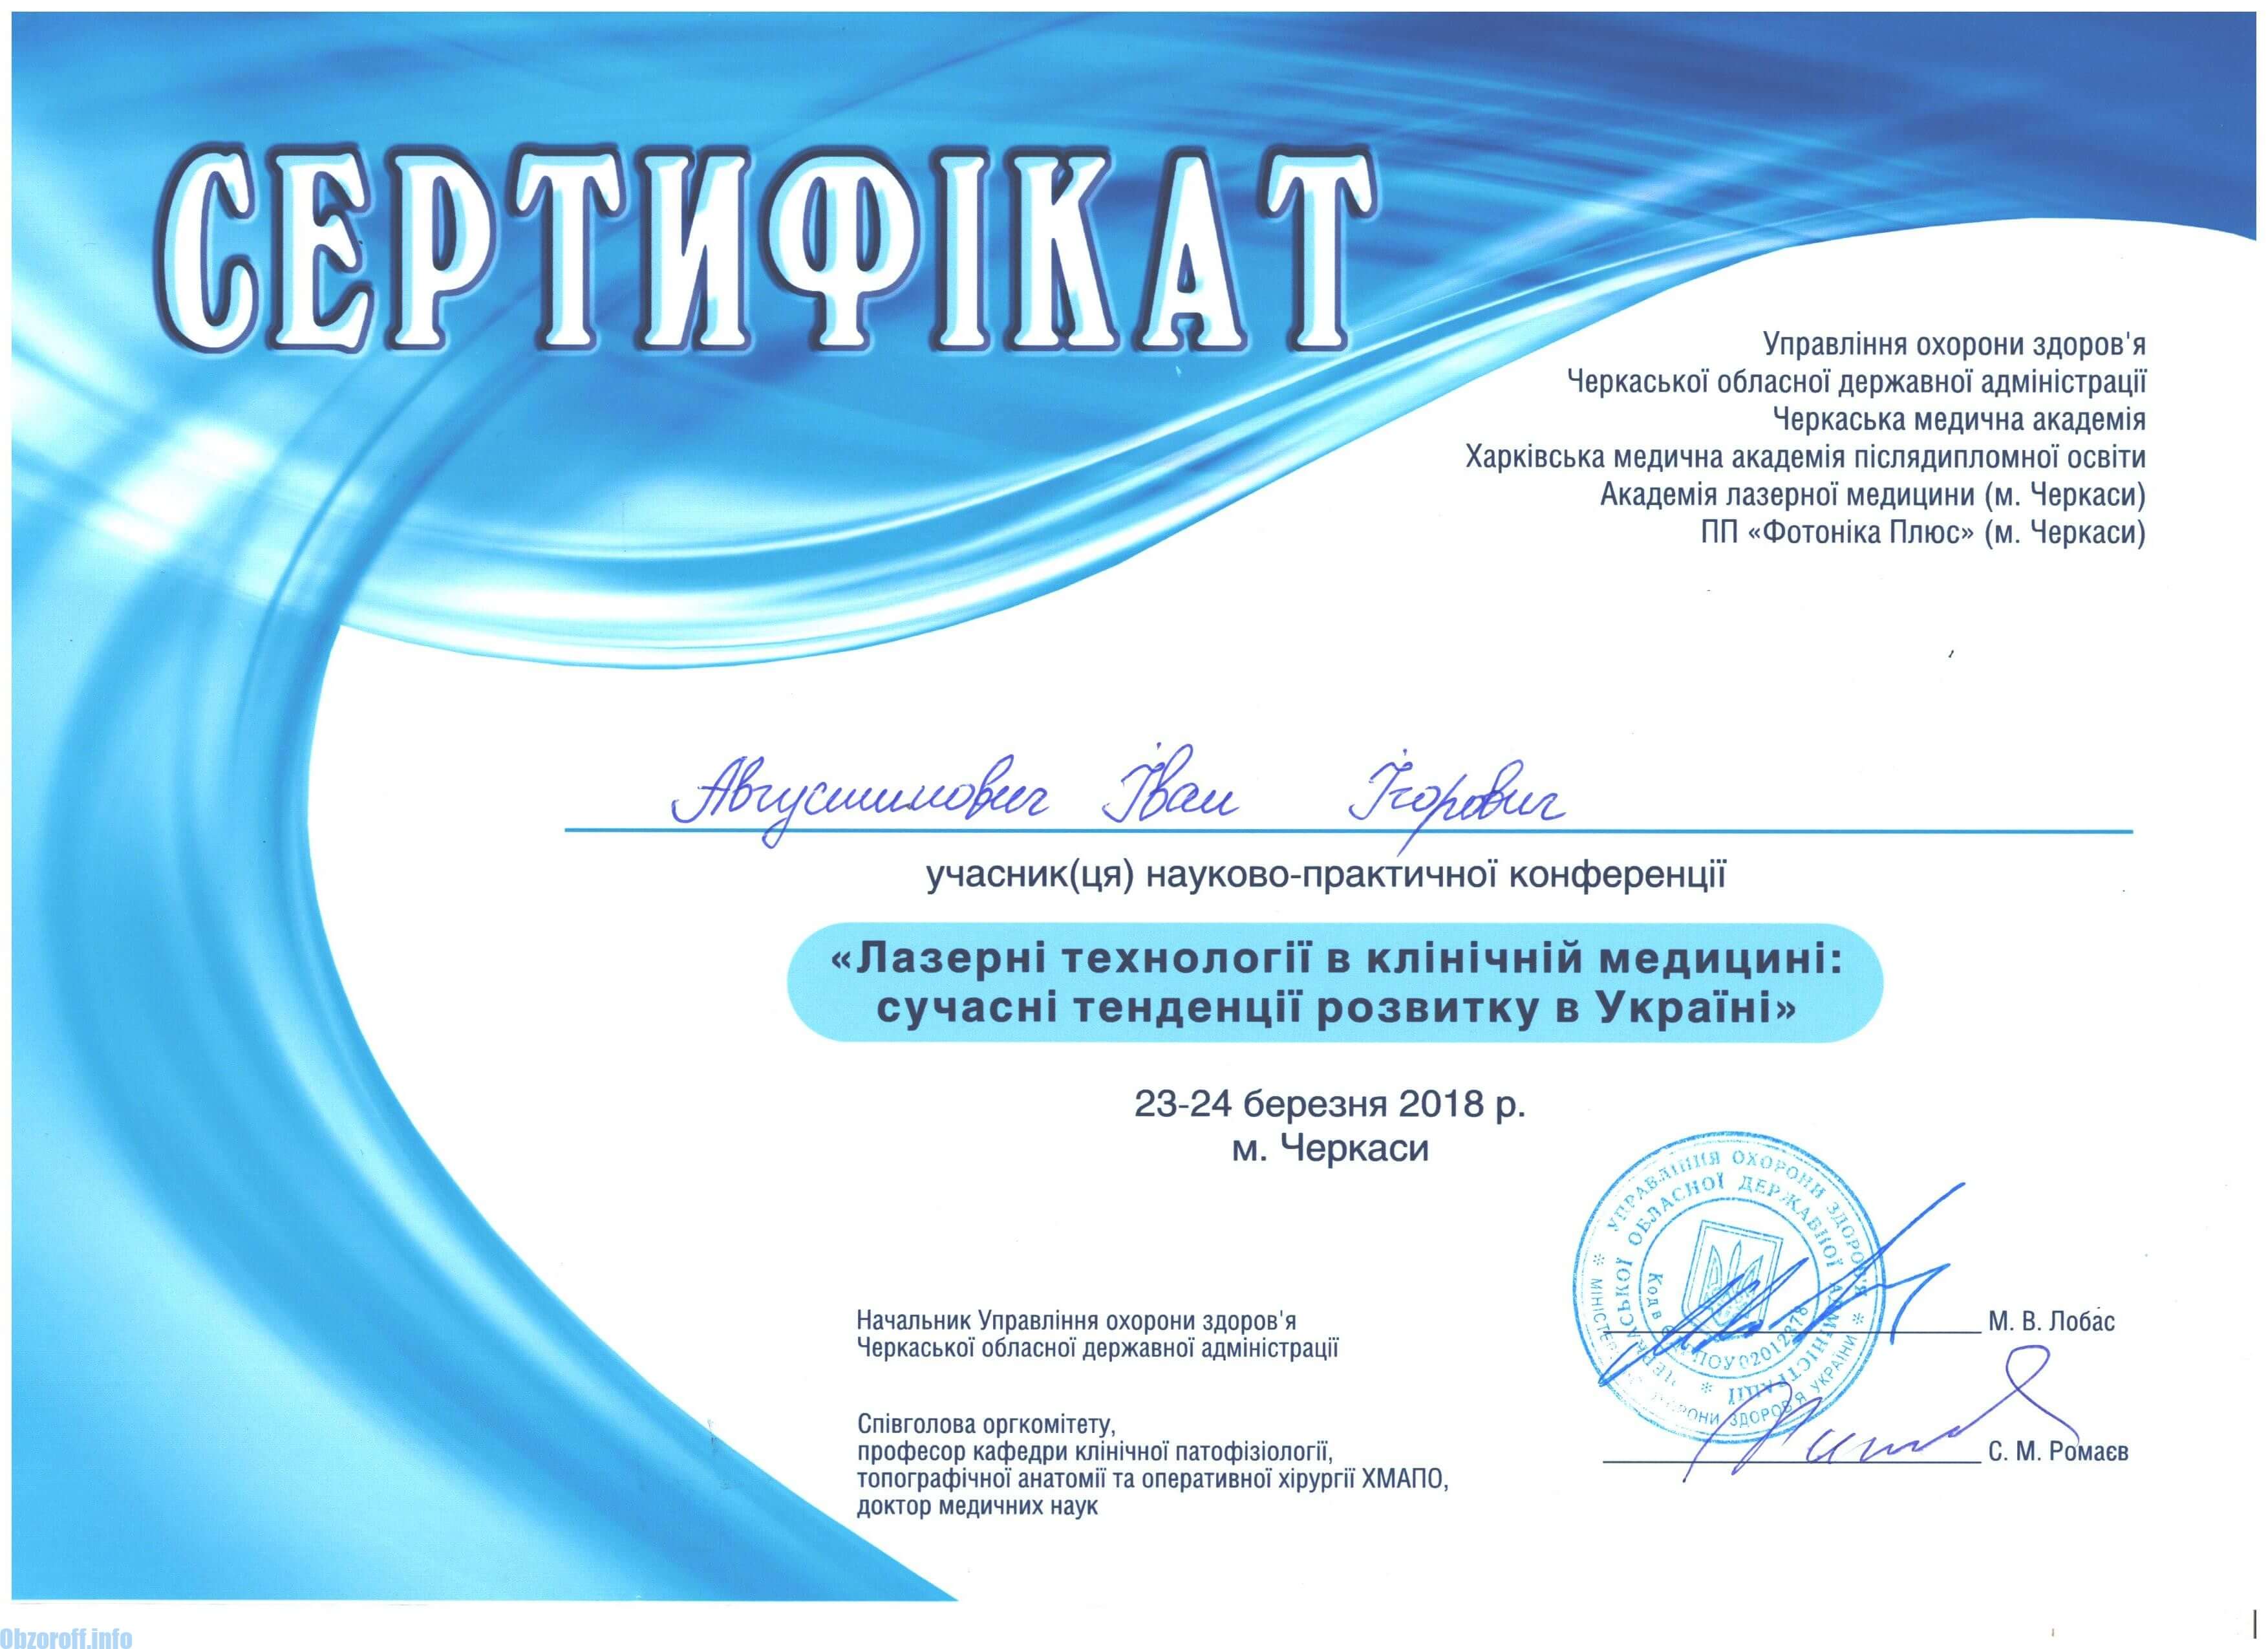 Certificate Laser Technology in Clinical Medicine